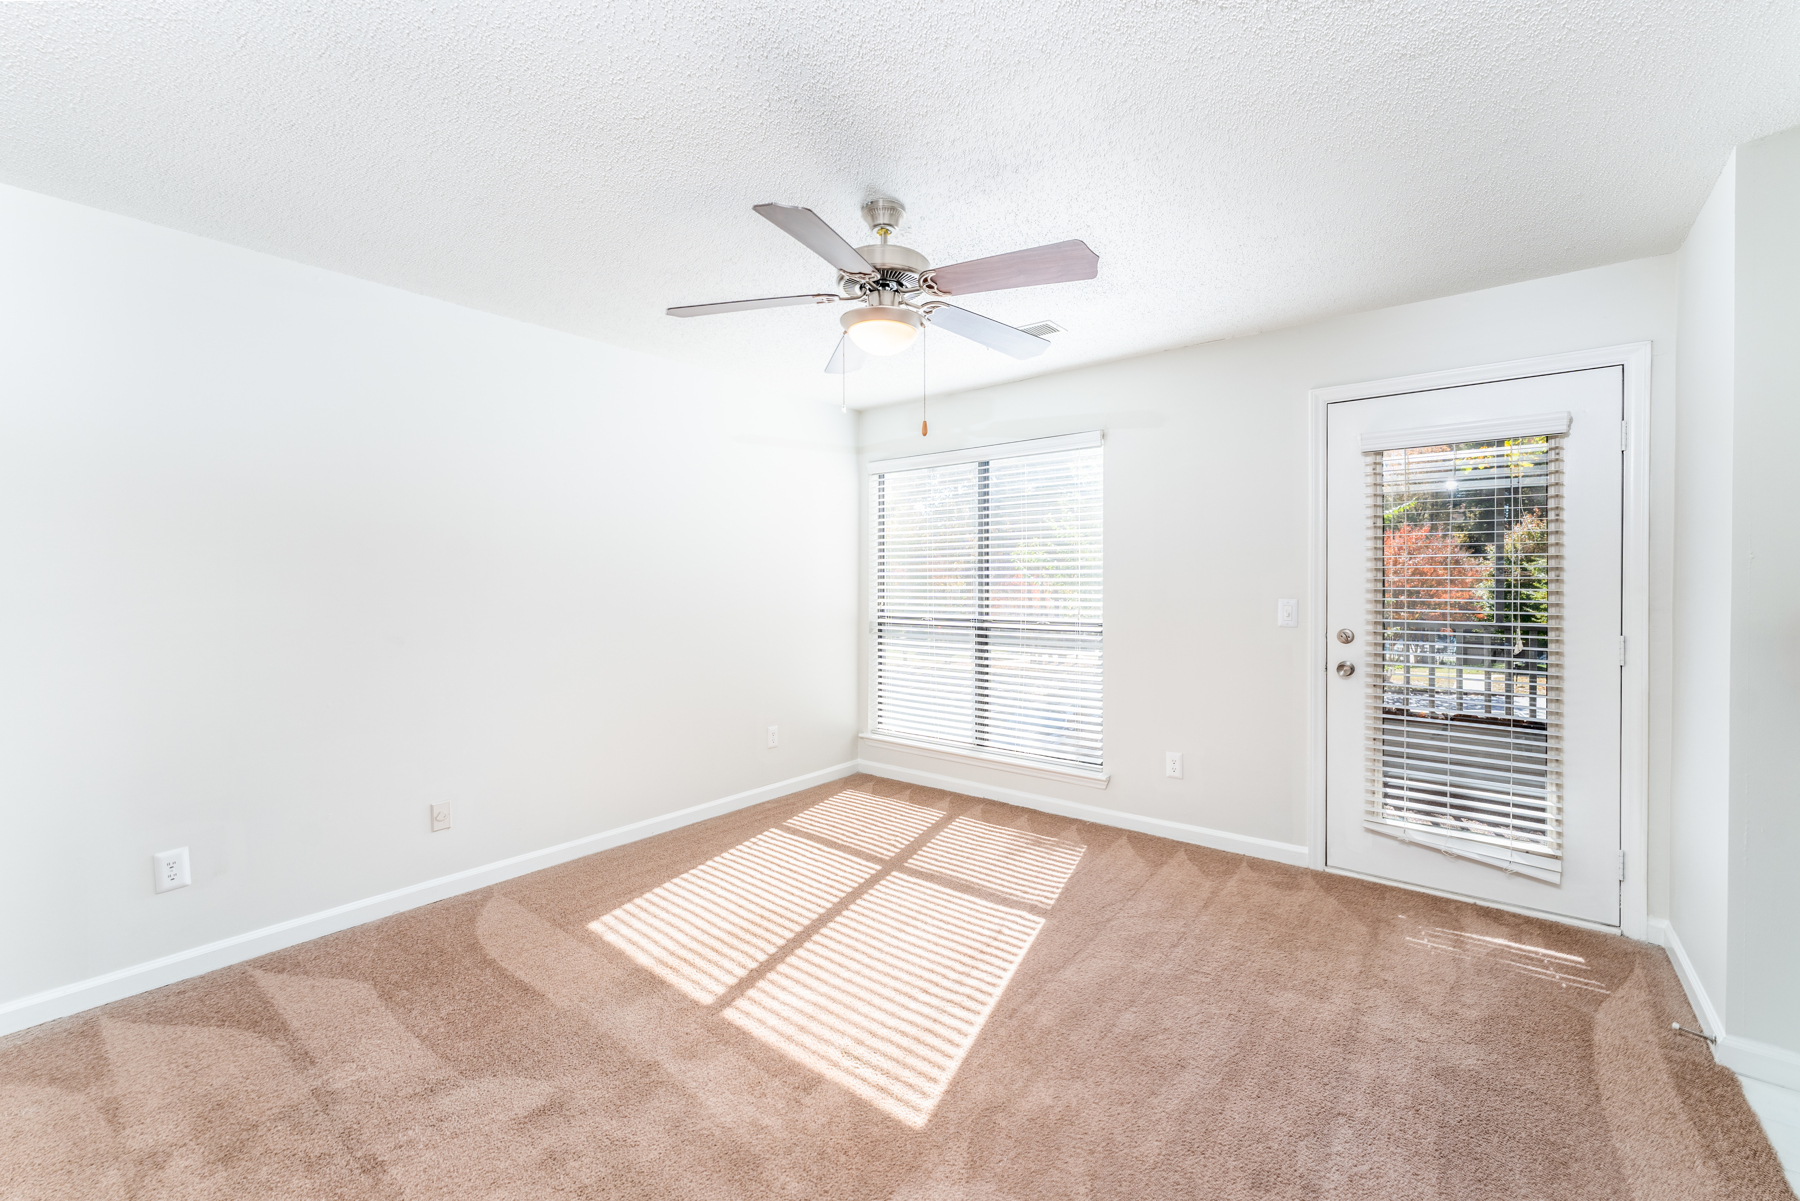 Carpeted living room with large windows at Huntsview Apartments in Greensboro, North Carolina